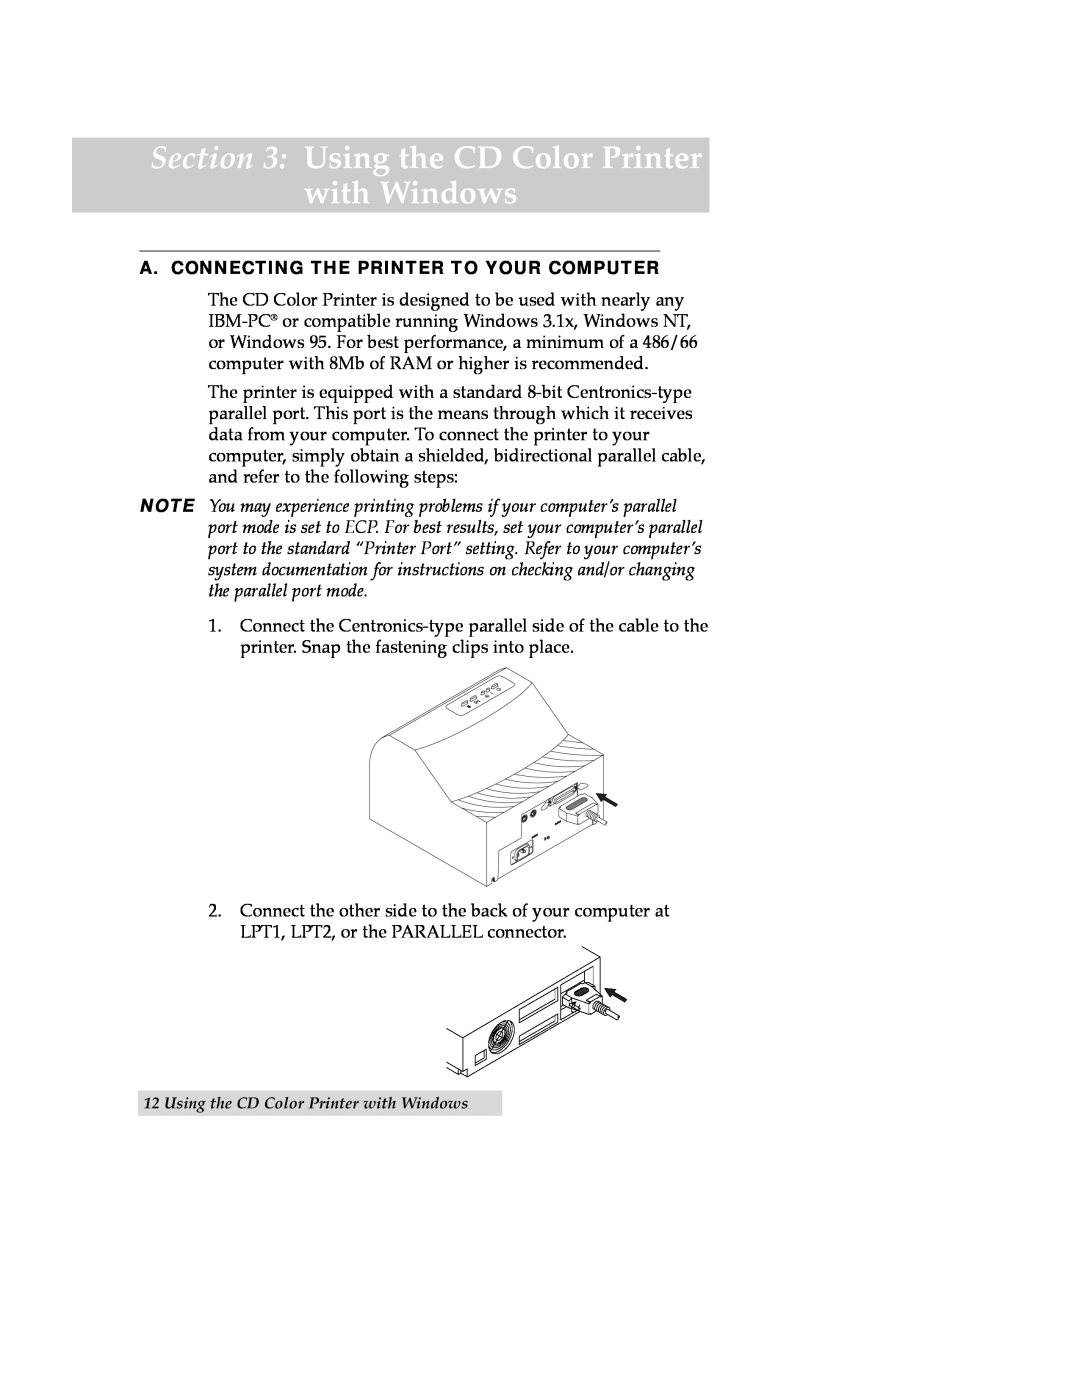 FARGO electronic manual A. Connecting The Printer To Your Computer, Using the CD Color Printer with Windows 